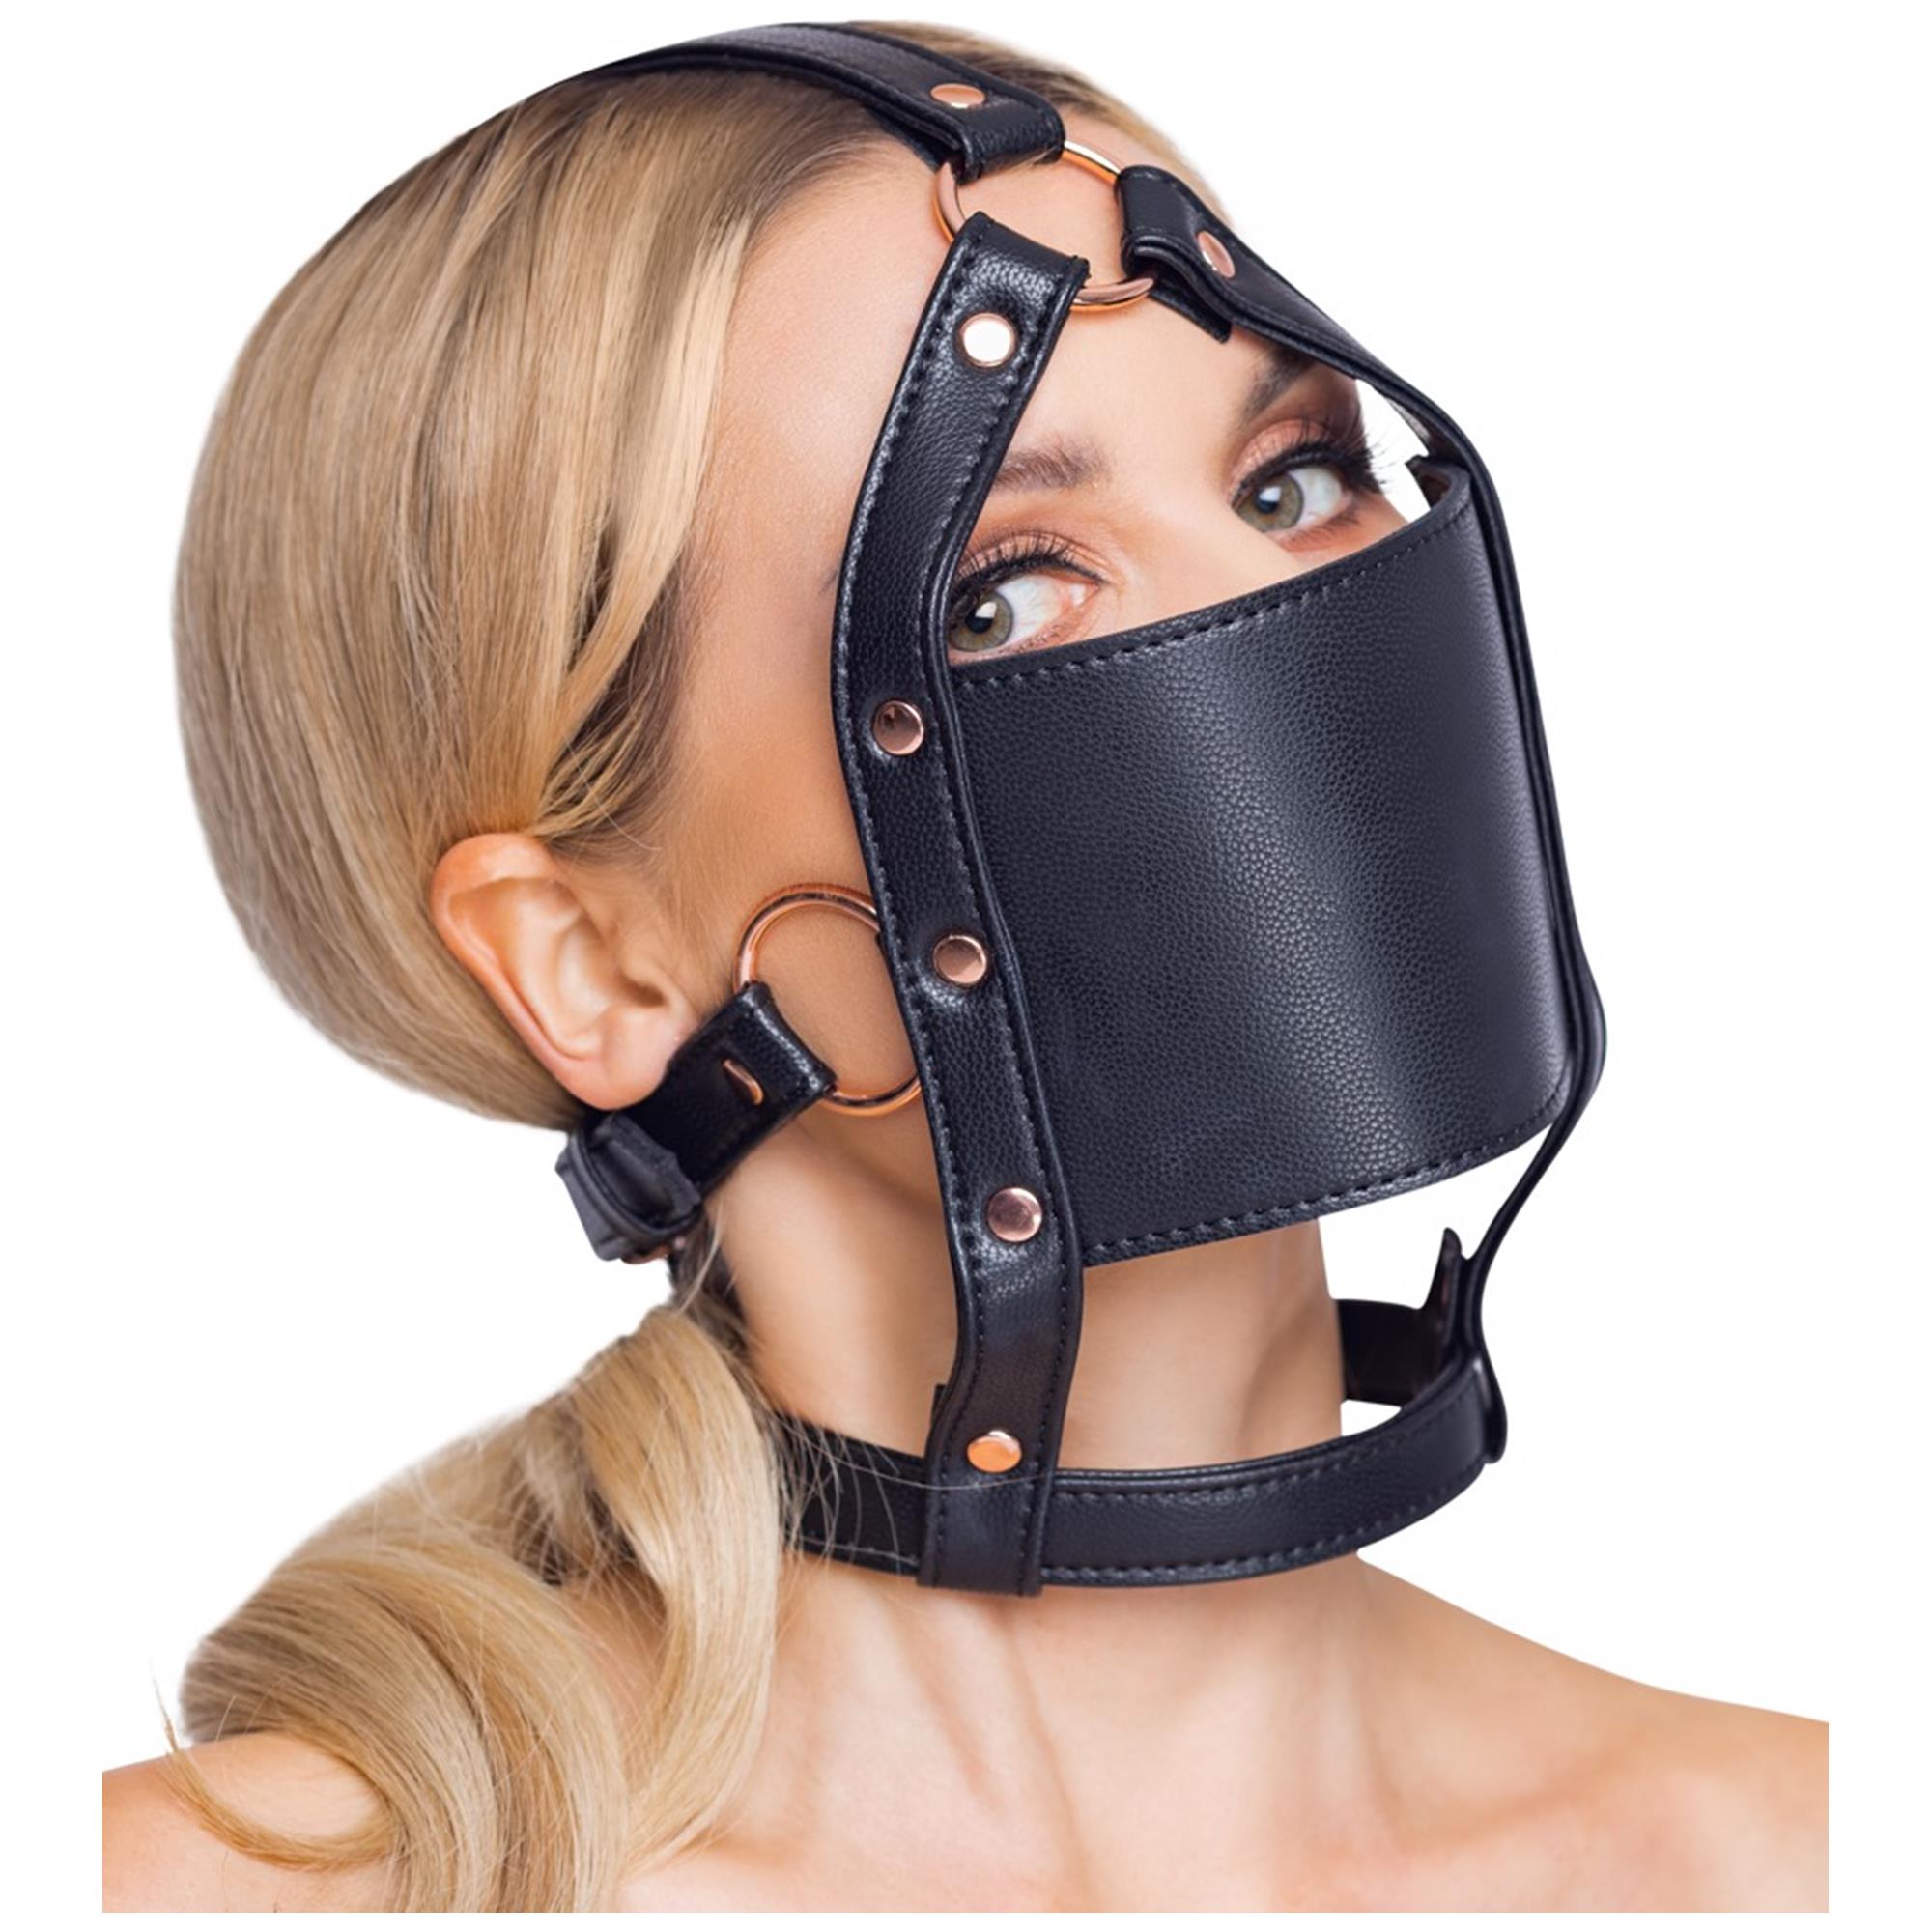 Head Harness With A Gag thumbnail